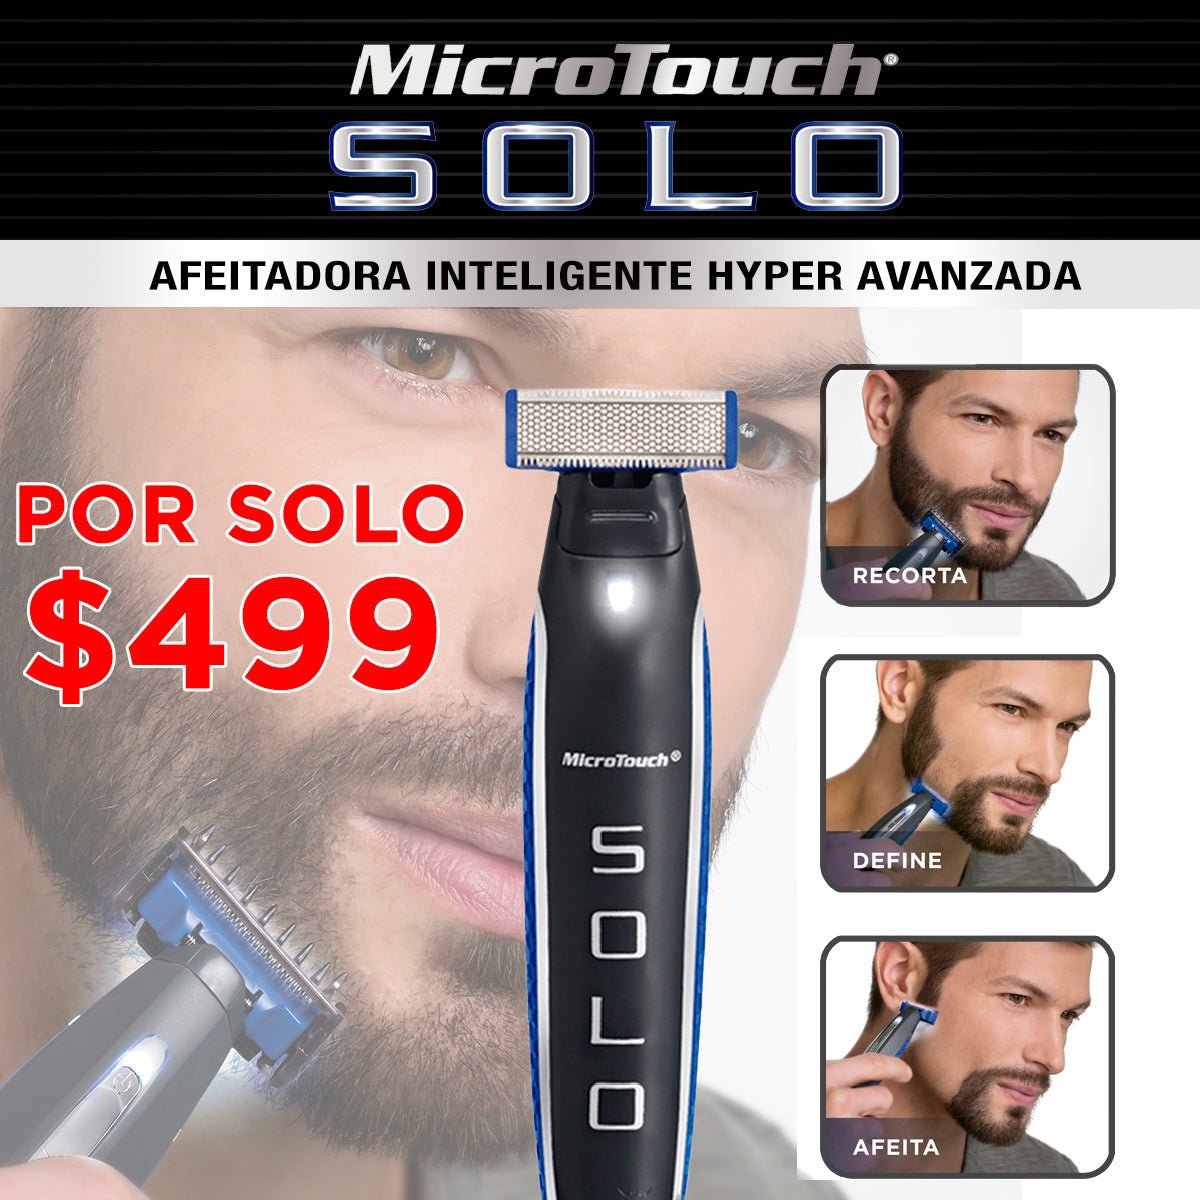 Microtouch Solo. - MejorCompraTV